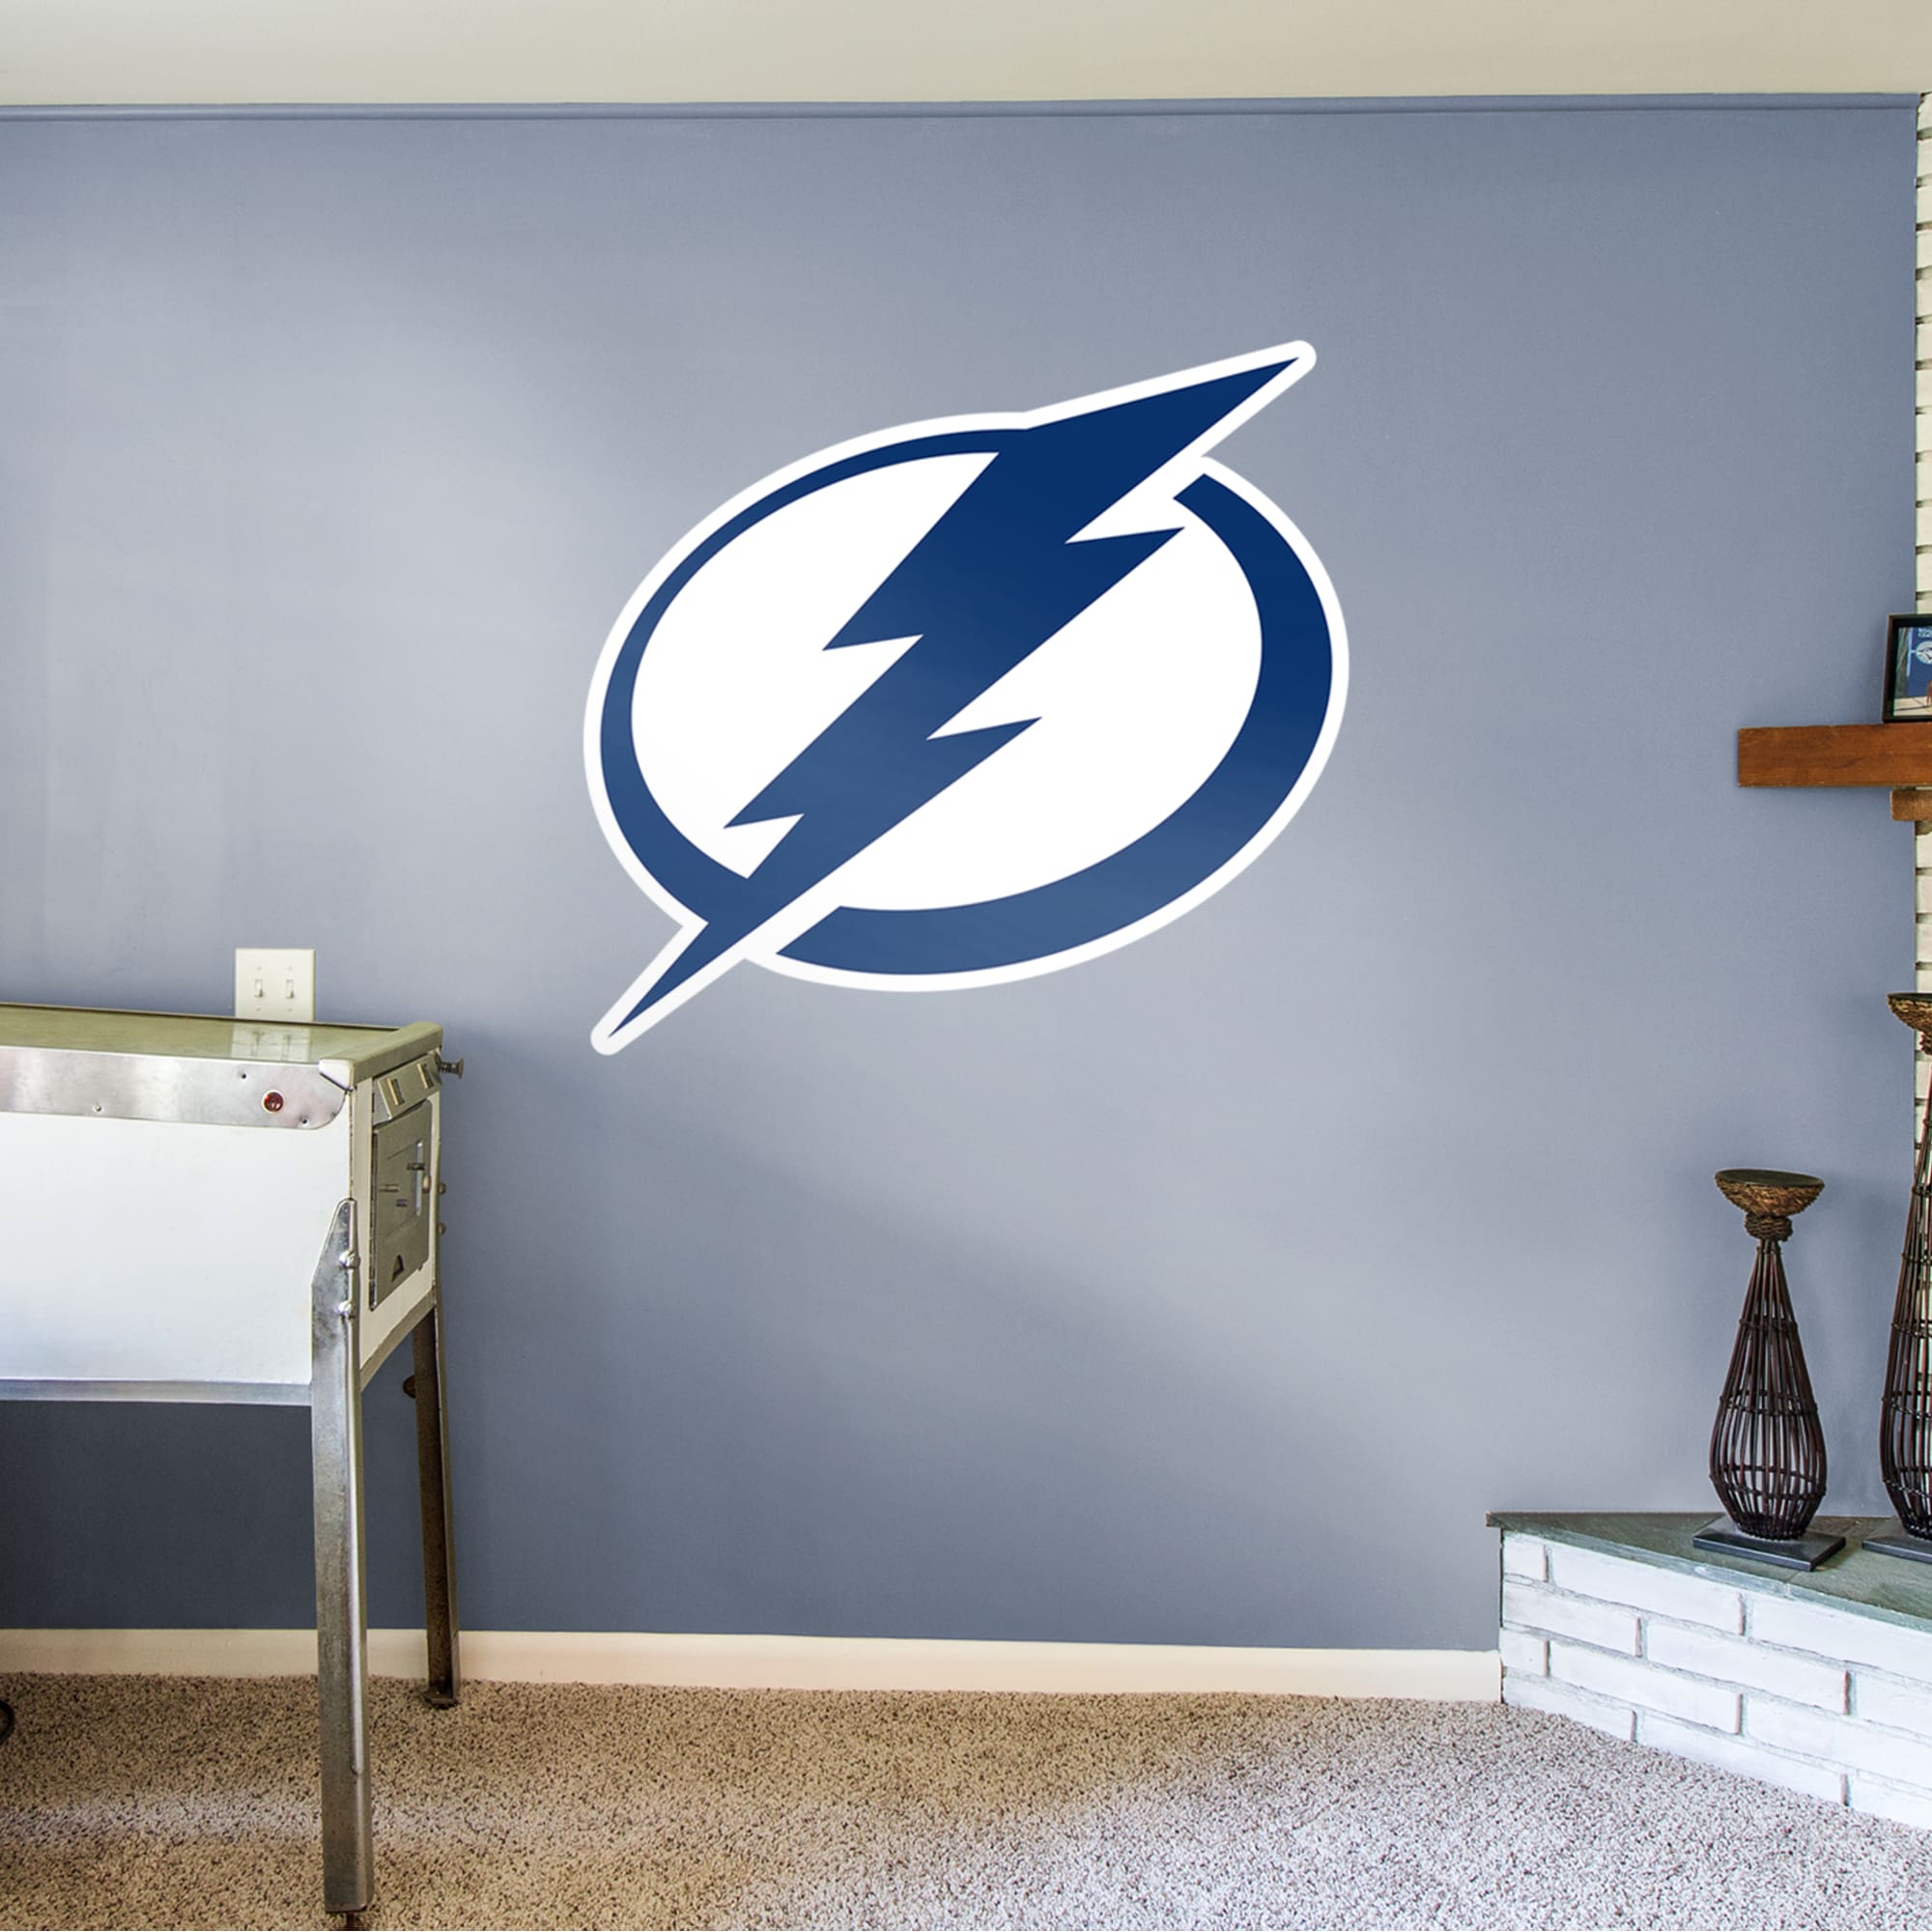 Tampa Bay Lightning: Logo - Officially Licensed NHL Removable Wall Decal Giant Logo (57"W x 33"H) by Fathead | Vinyl